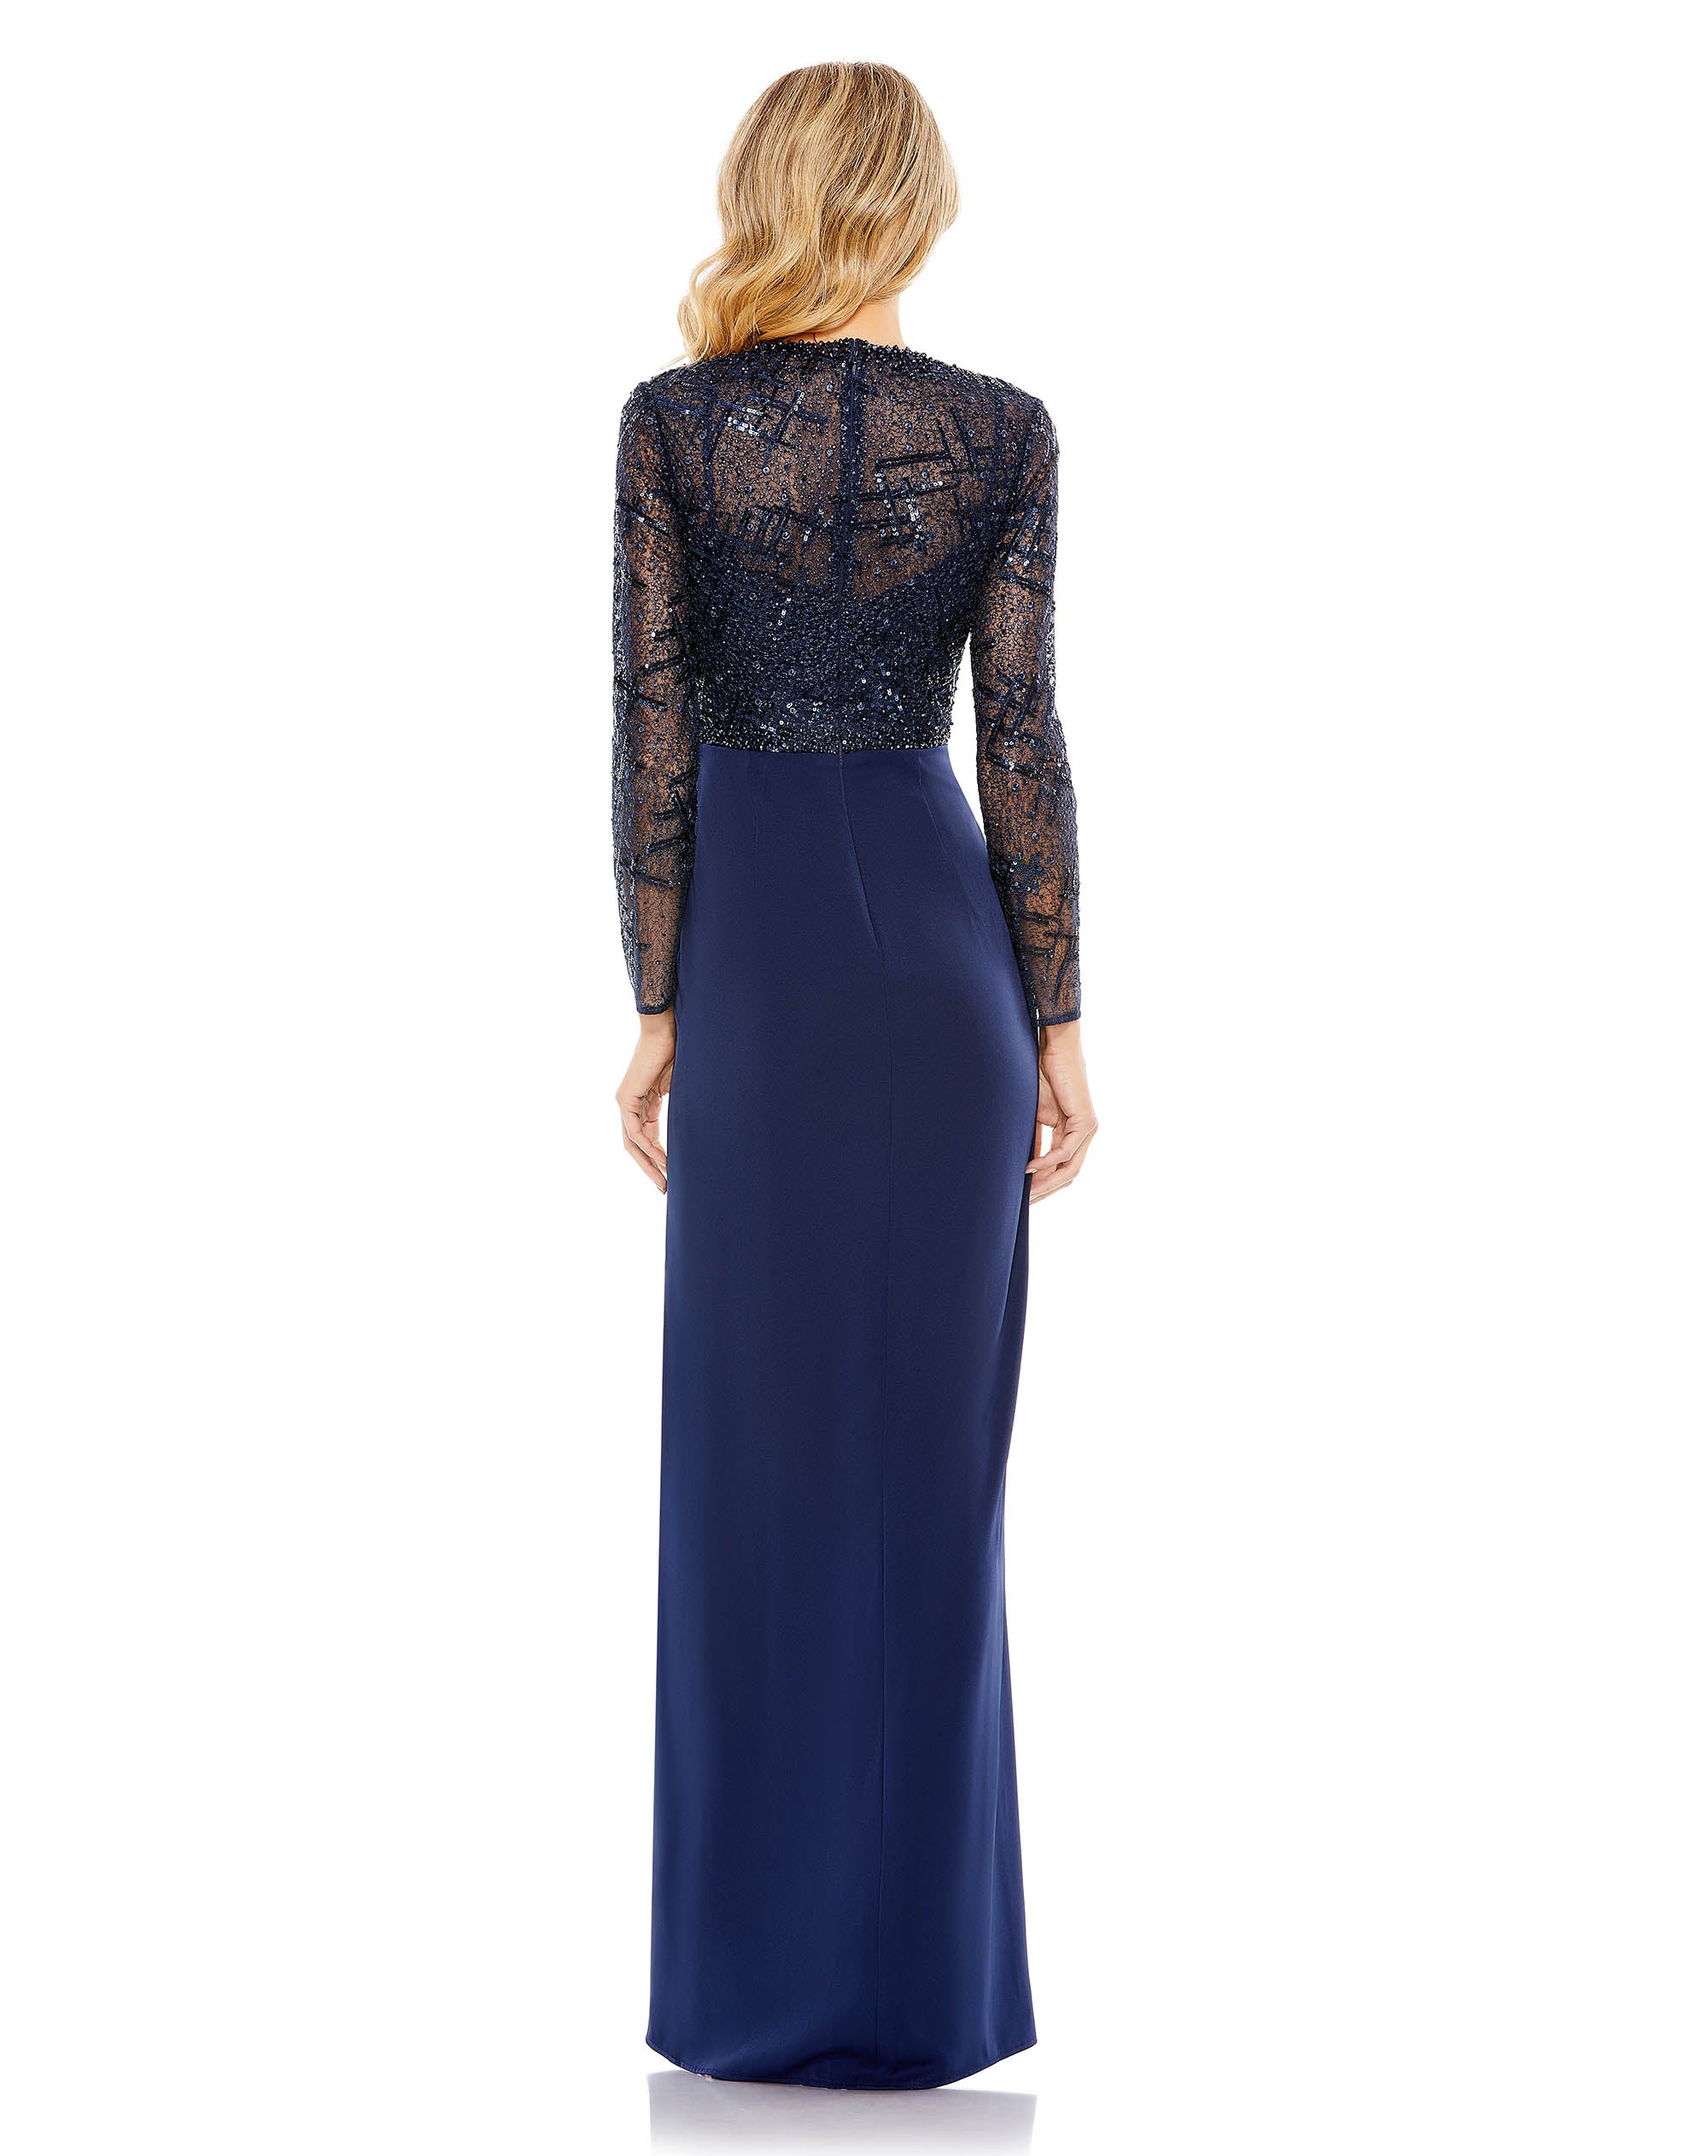 Embellished High Neck Bodice Faux Wrap Gown